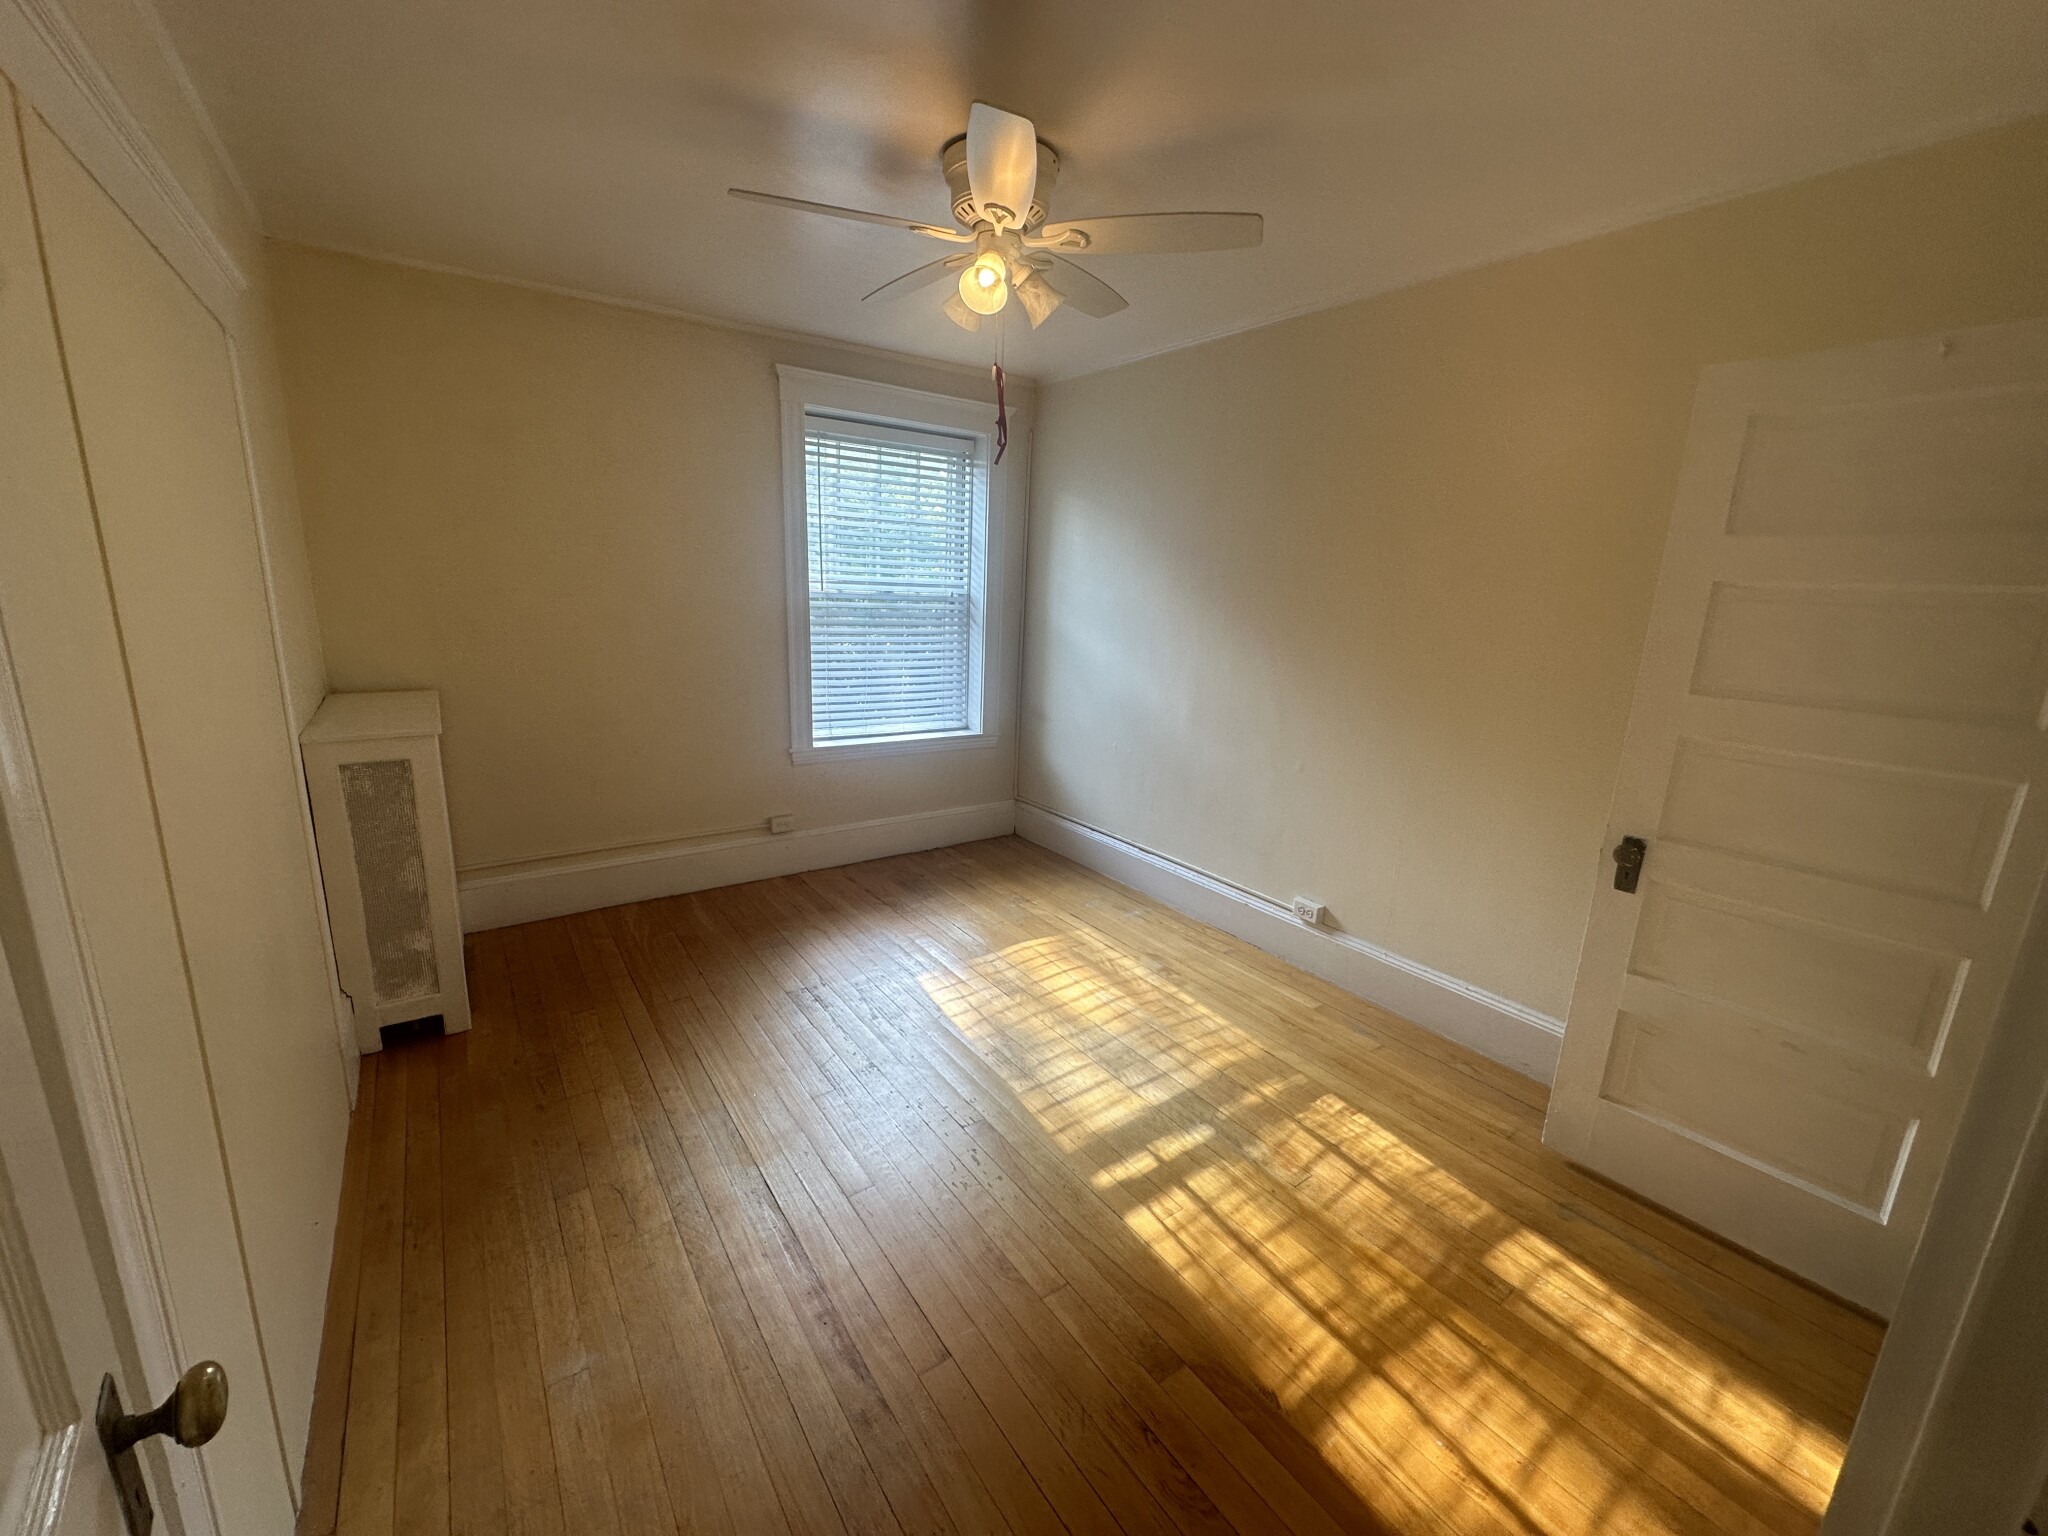 Photos of apartment on Dudley St.,Cambridge MA 02140